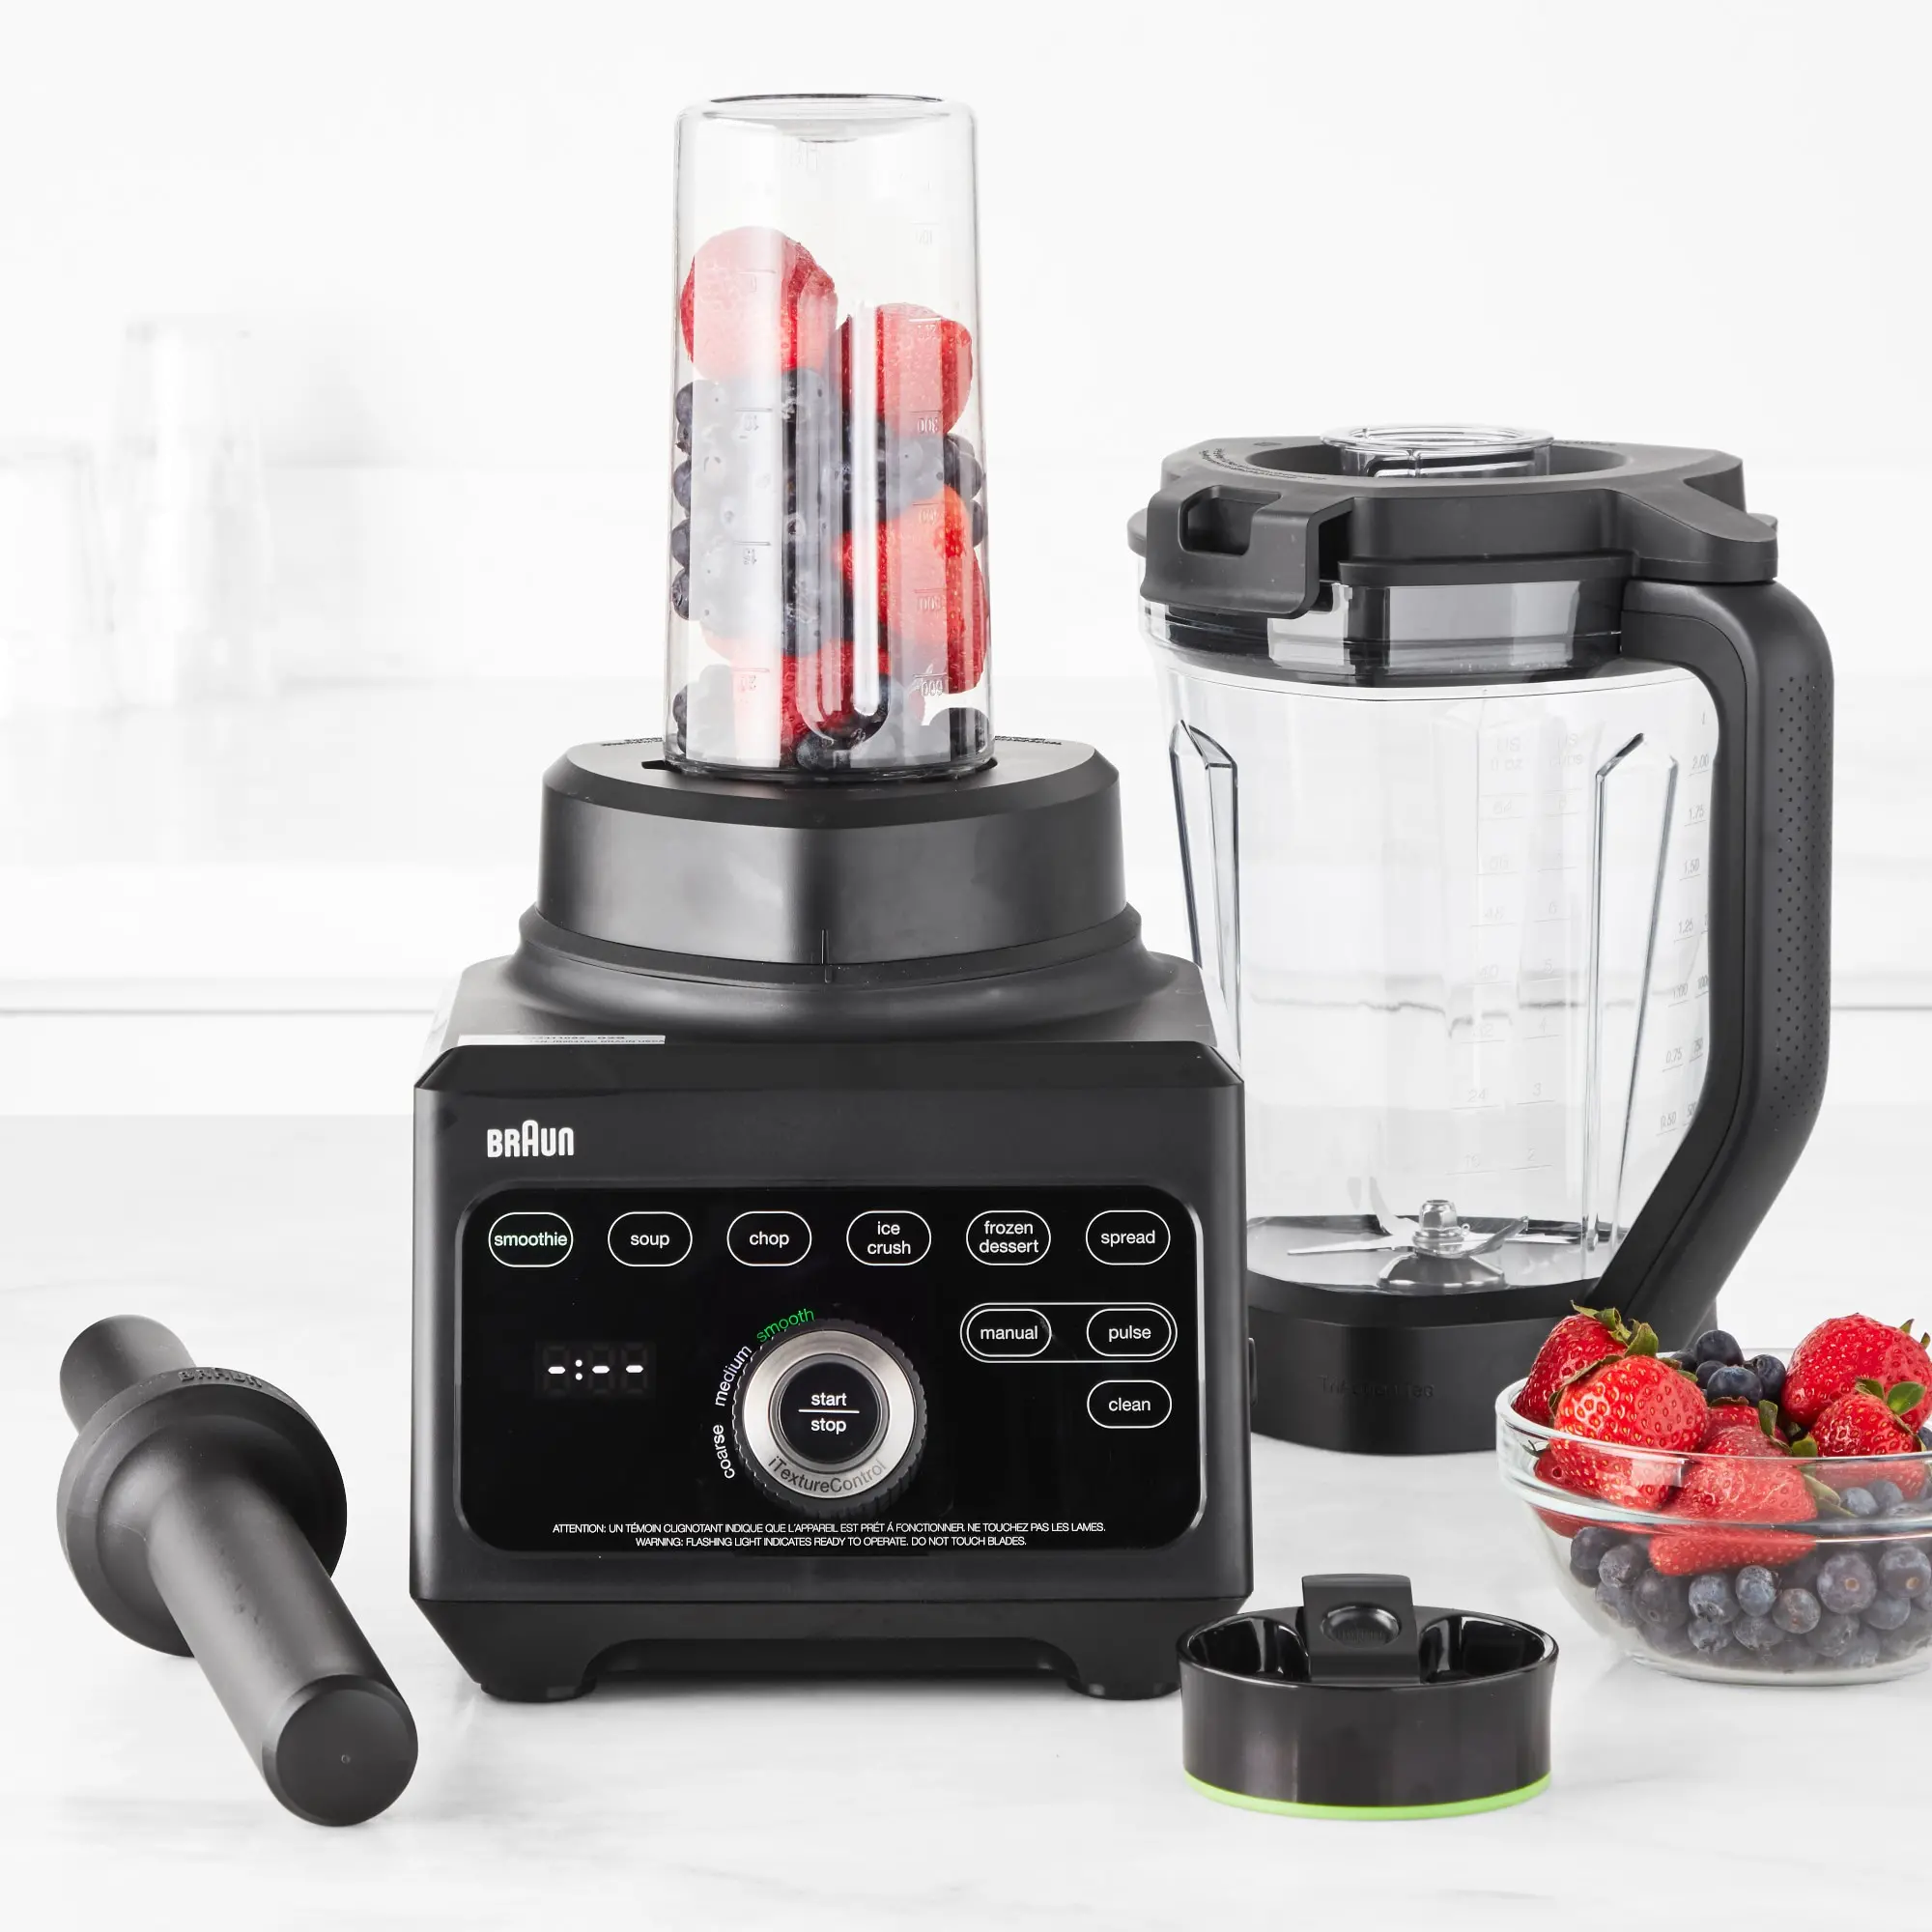 https://static.rcwilley.com/products/112930808/Braun-TriForce-Power-Blender-with-Smoothie2Go-rcwilley-image1.webp